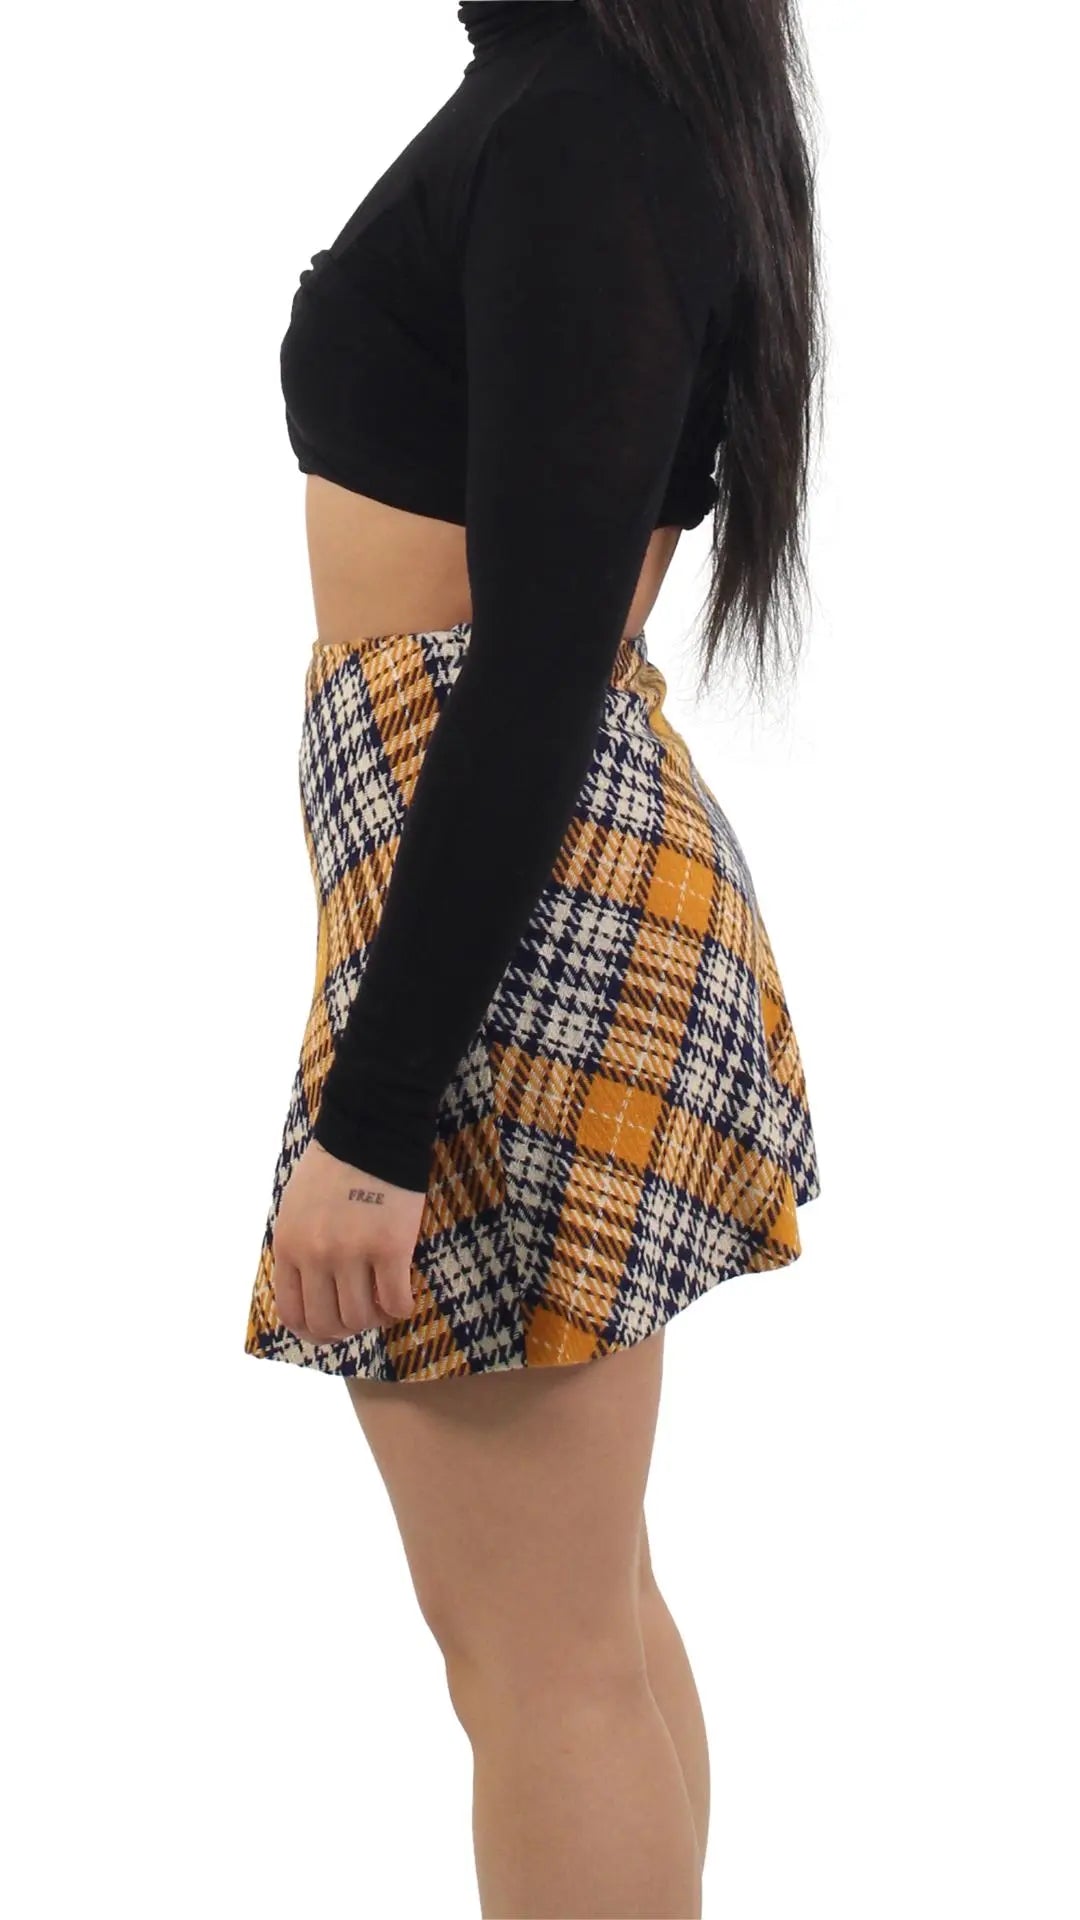 Unknown - Checked Skirt- ThriftTale.com - Vintage and second handclothing